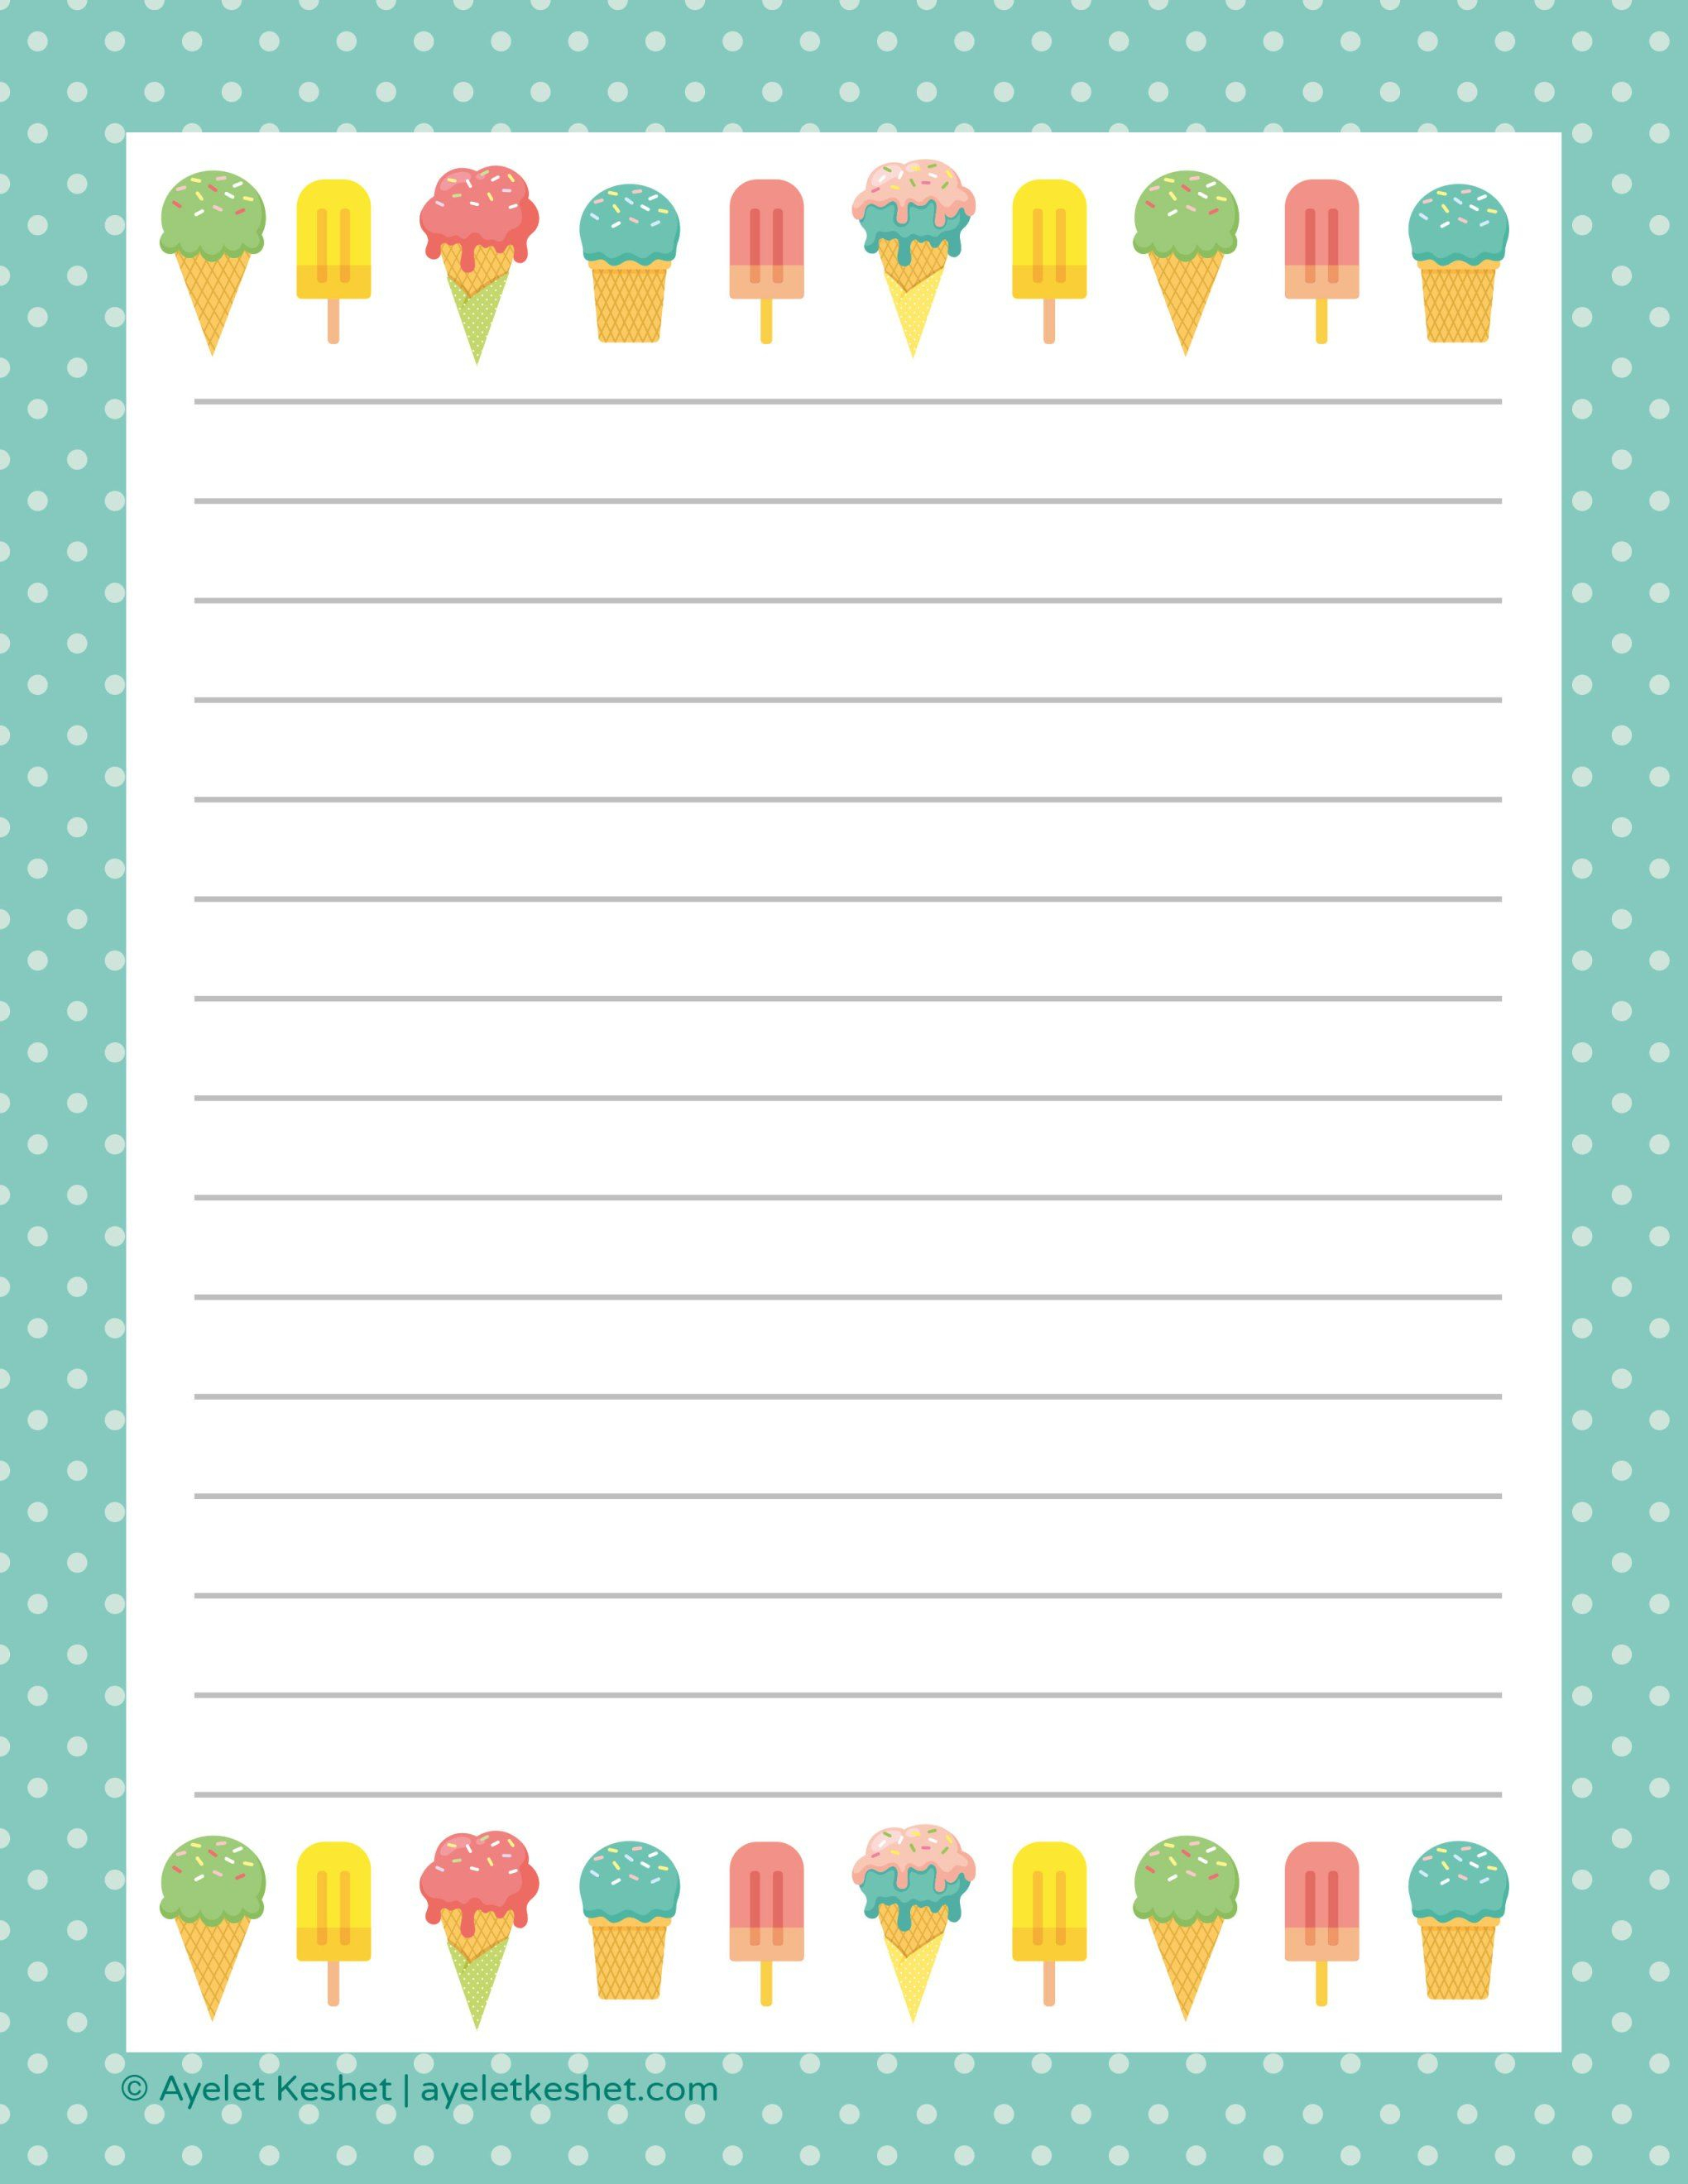 Free Printable Letter Paper | Printables To Go | Free Printable - Free Printable Writing Paper